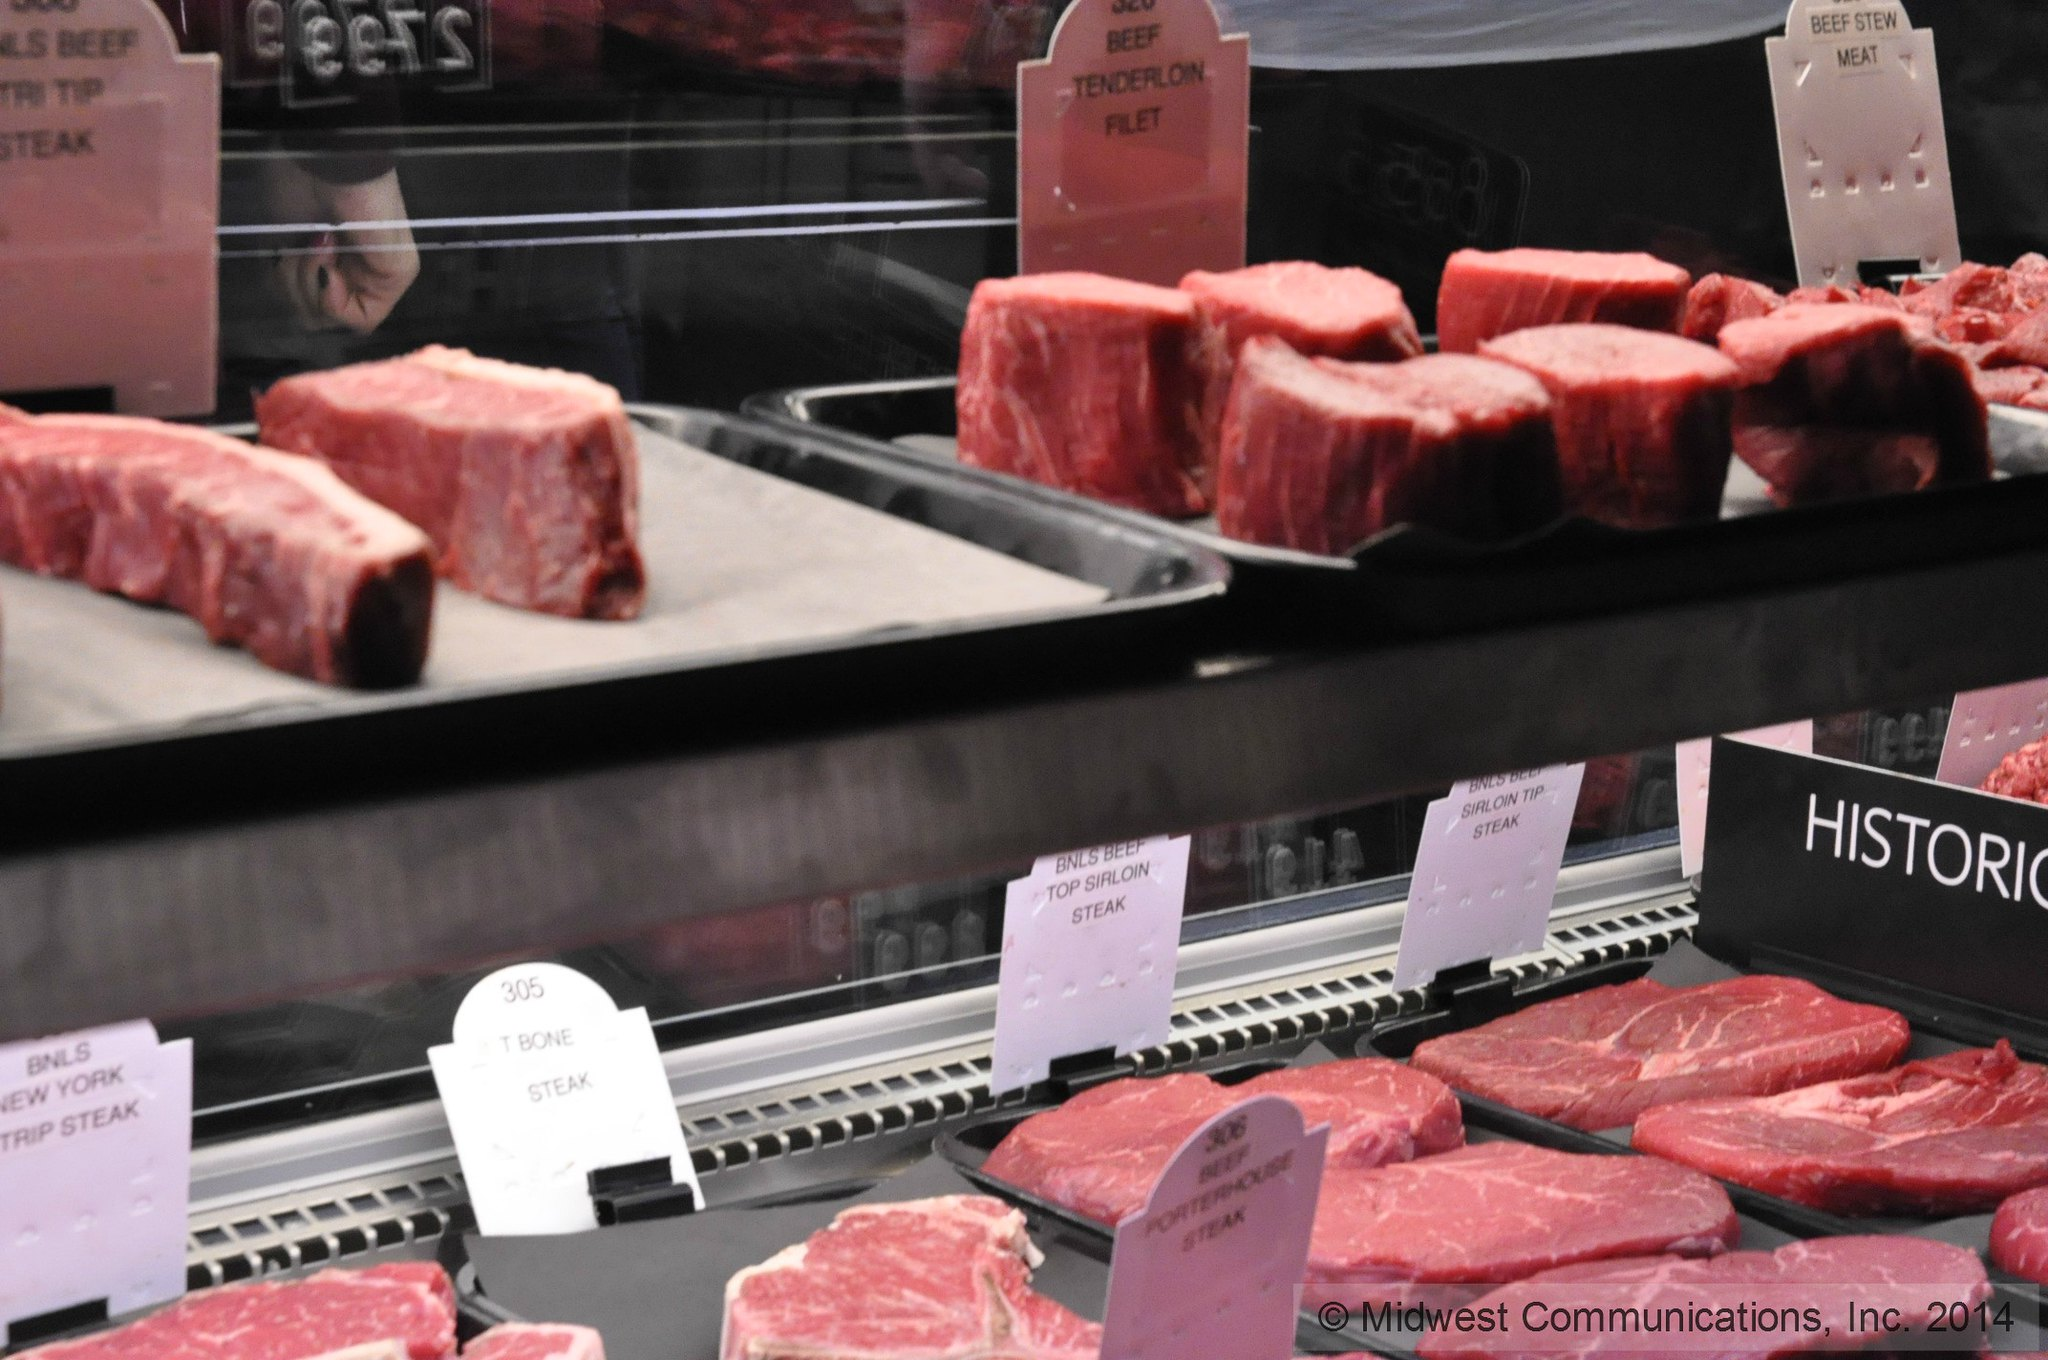 Is red meat good or bad for you?